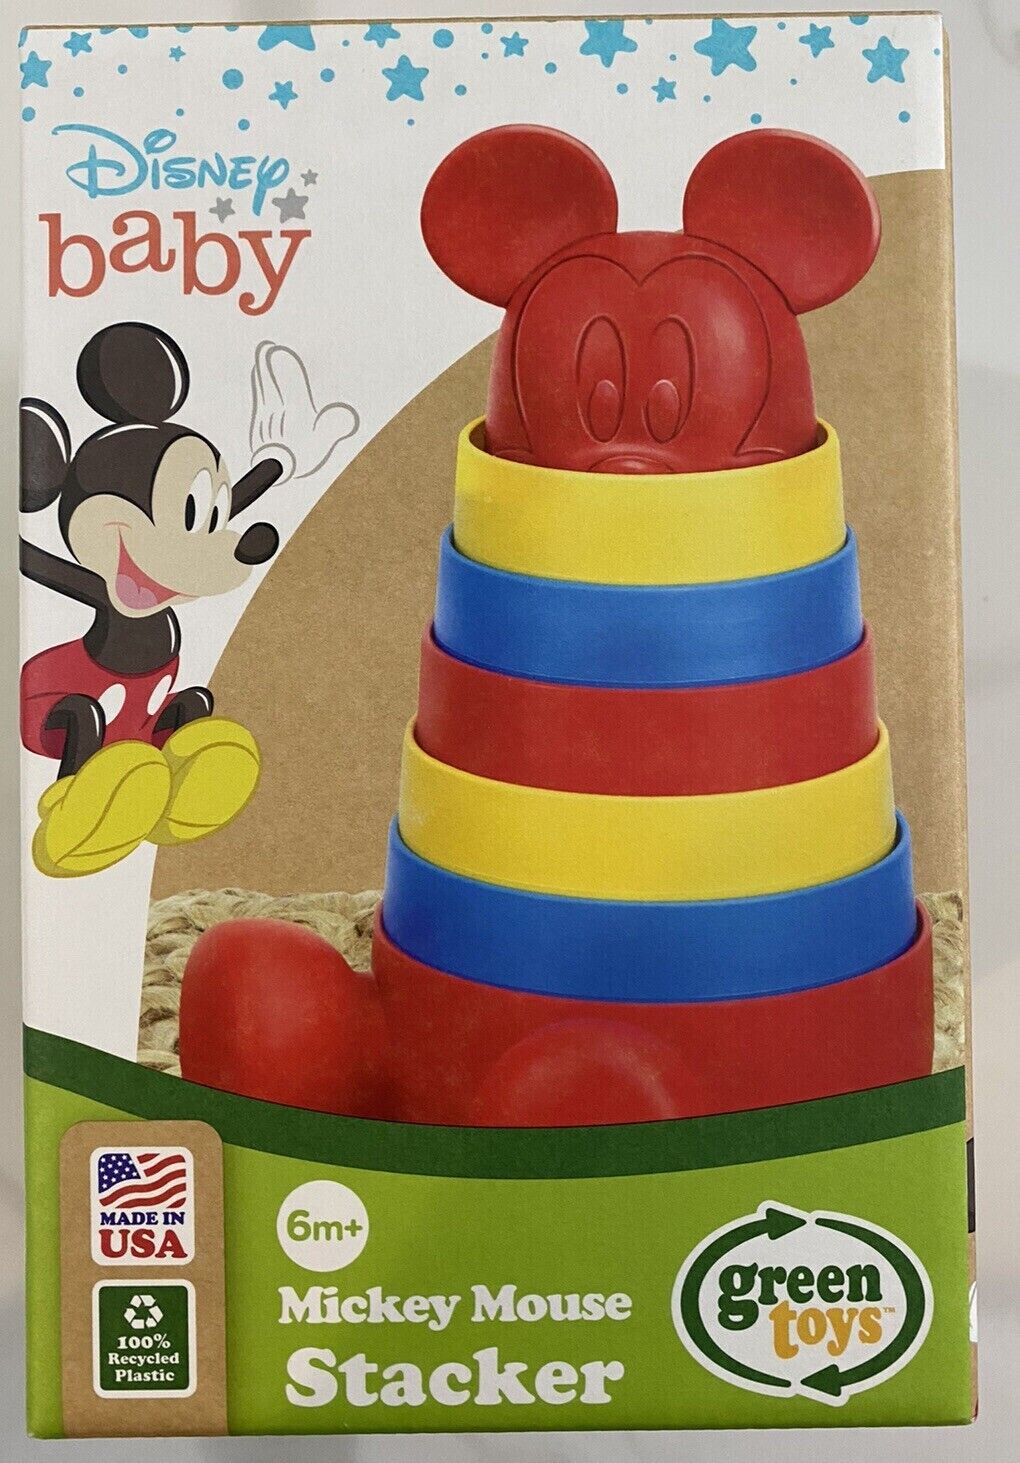 Disney Baby /mickey Mouse Stacker Blue, Red And Yellow/ Green Toy/ 6+ Months